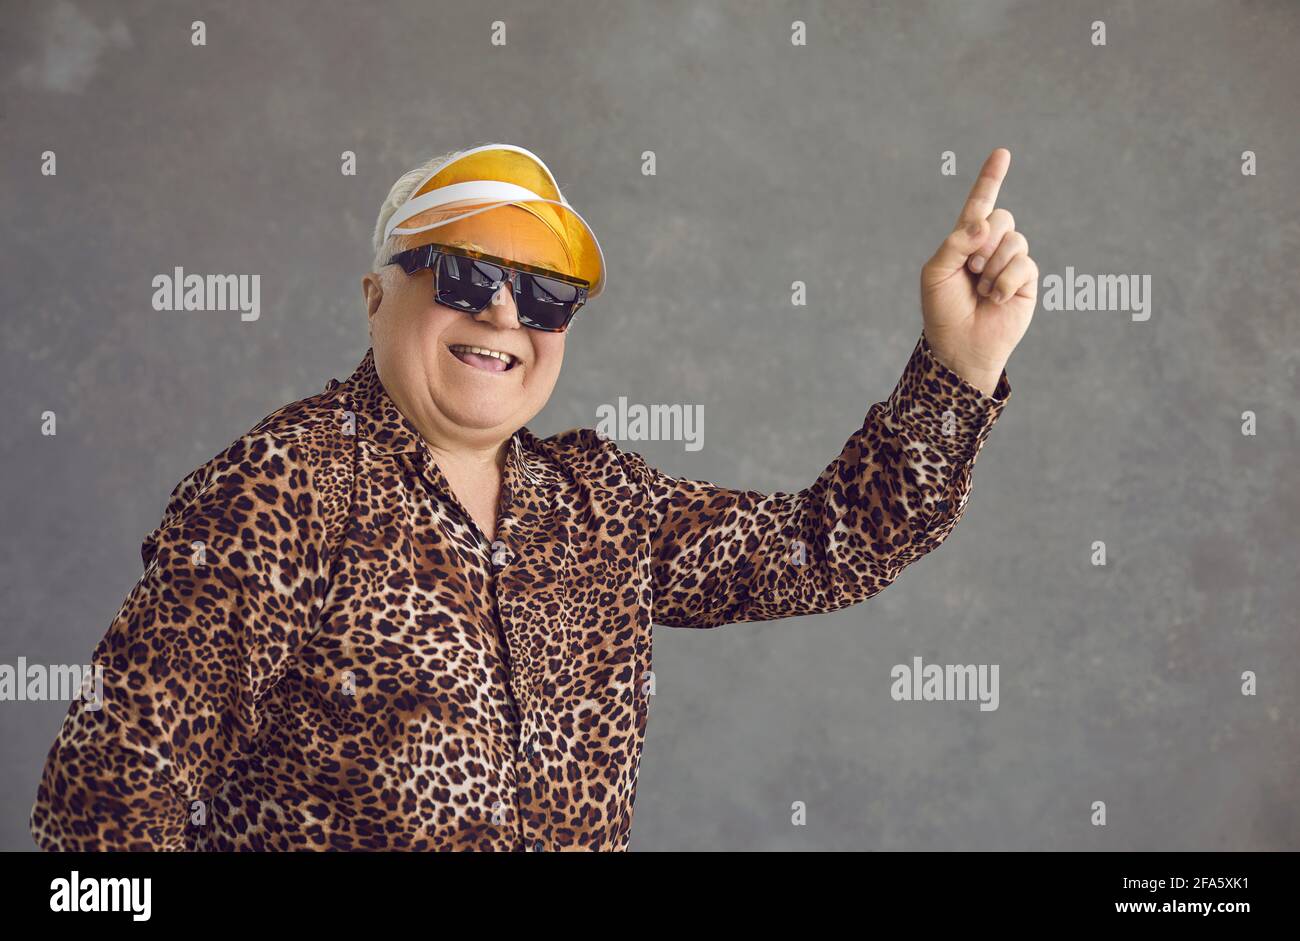 Headshot portrait of funny stylish handsome old man pointing up with finger Stock Photo